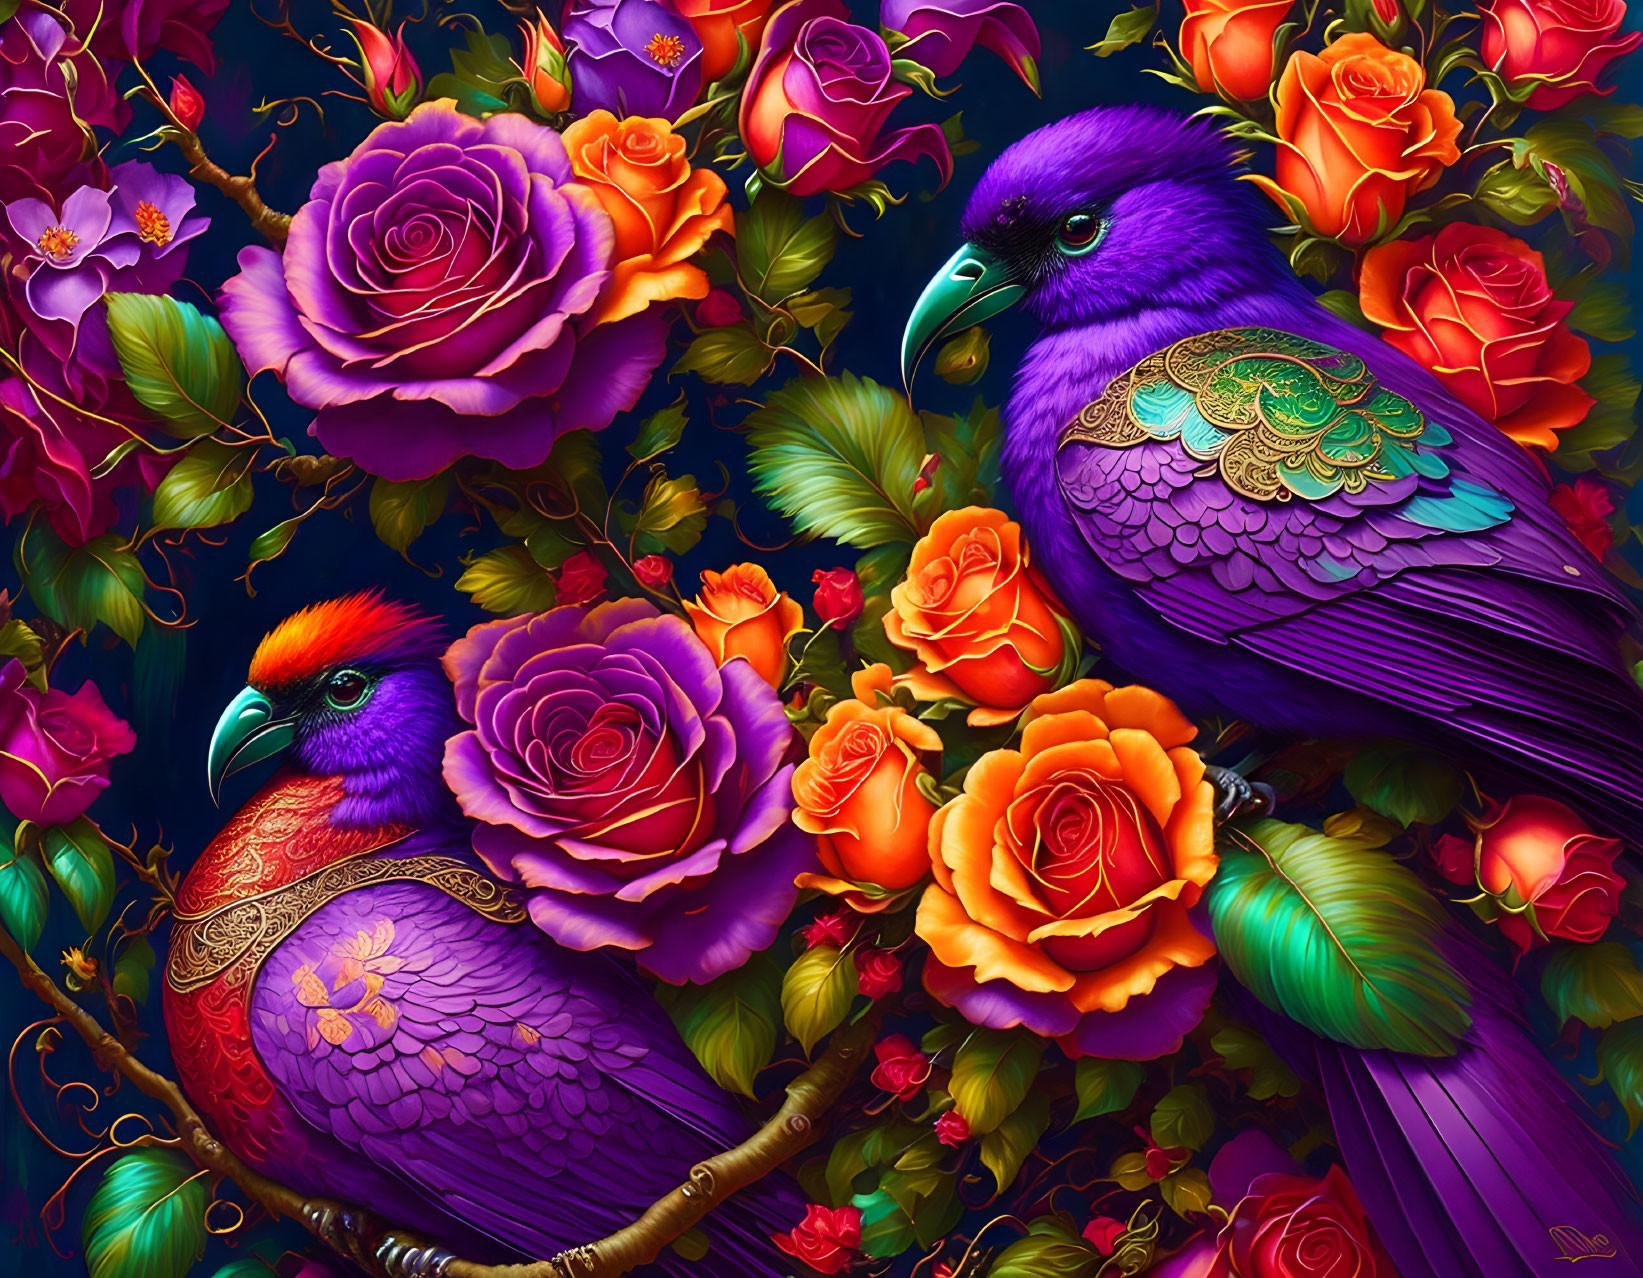 Detailed digital art of purple birds with intricate feathers among multicolored roses on dark background